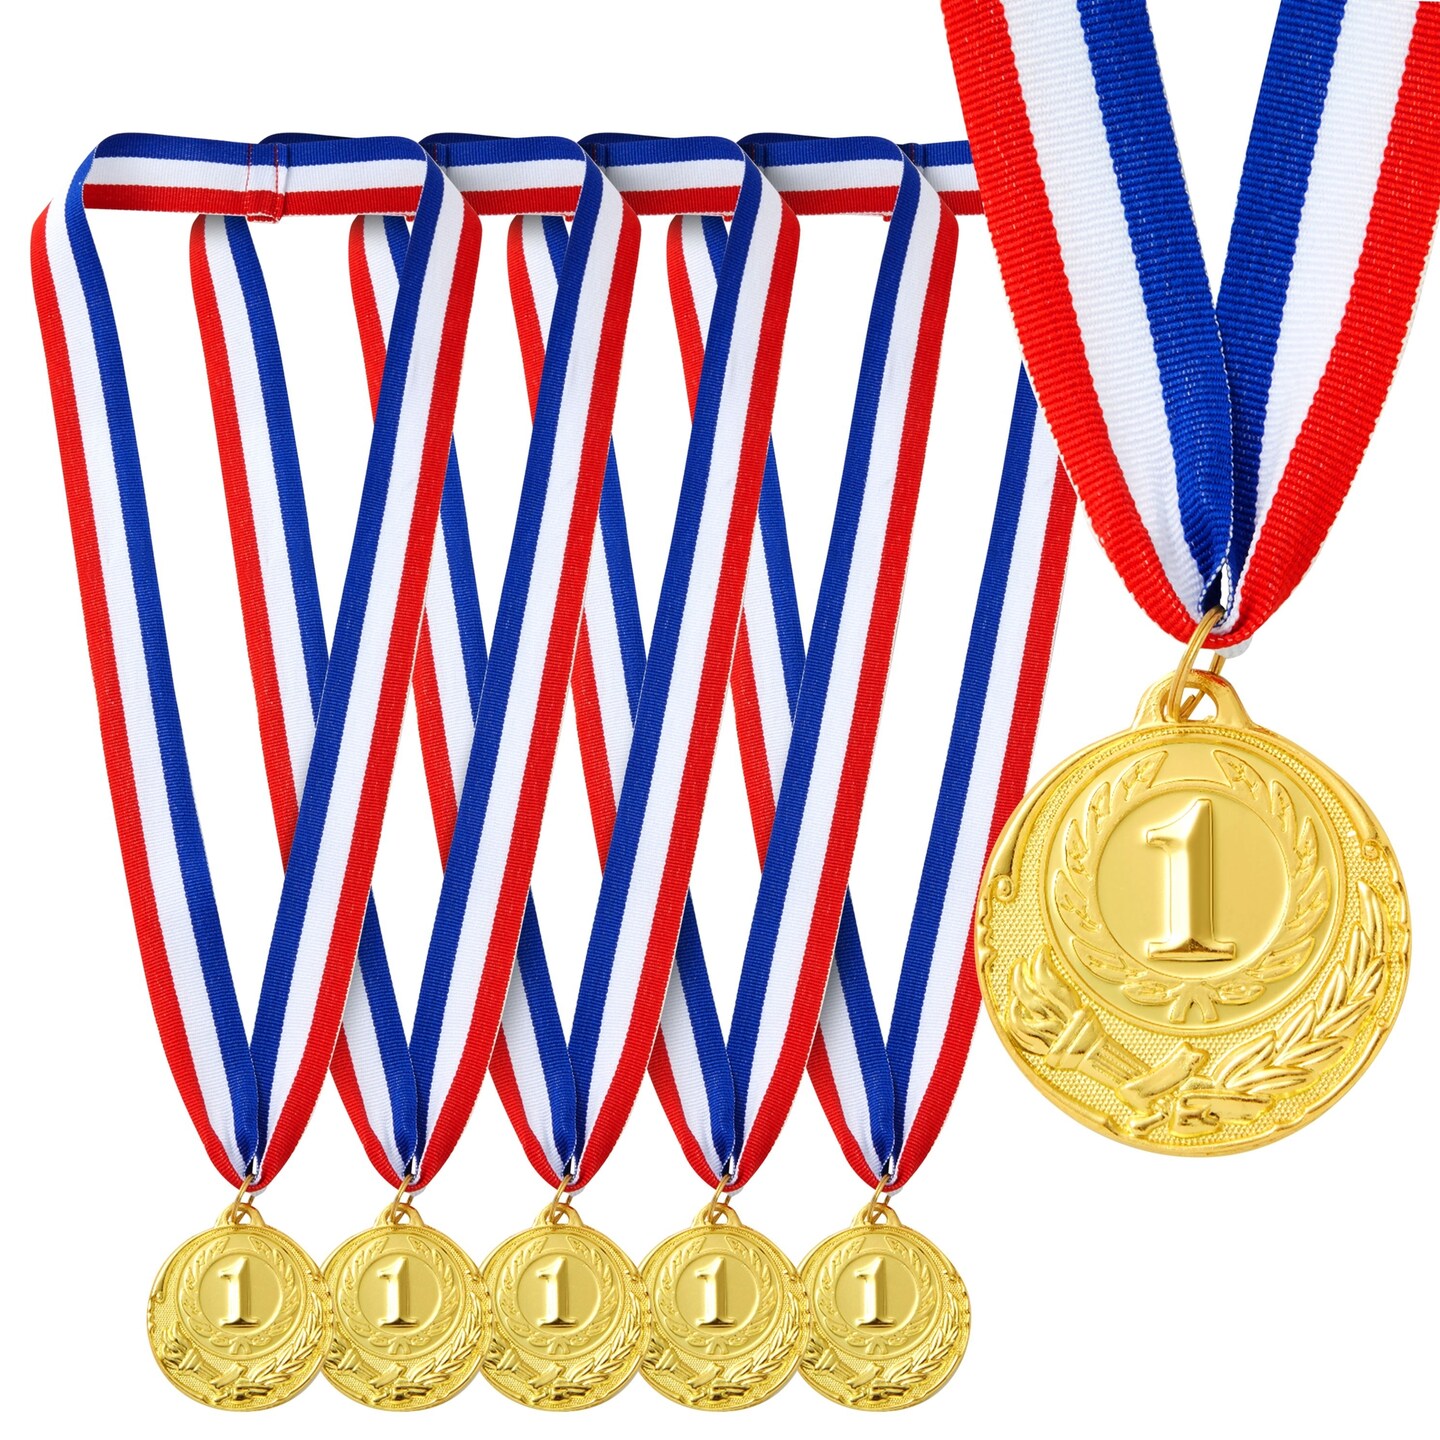 6-Pack 1st Place Winner Gold Medals for All Ages, Participation Awards with 15.5-Inch Red, White, and Blue Ribbon for Sports, Tournaments, Competitions (Metal, 2 in)